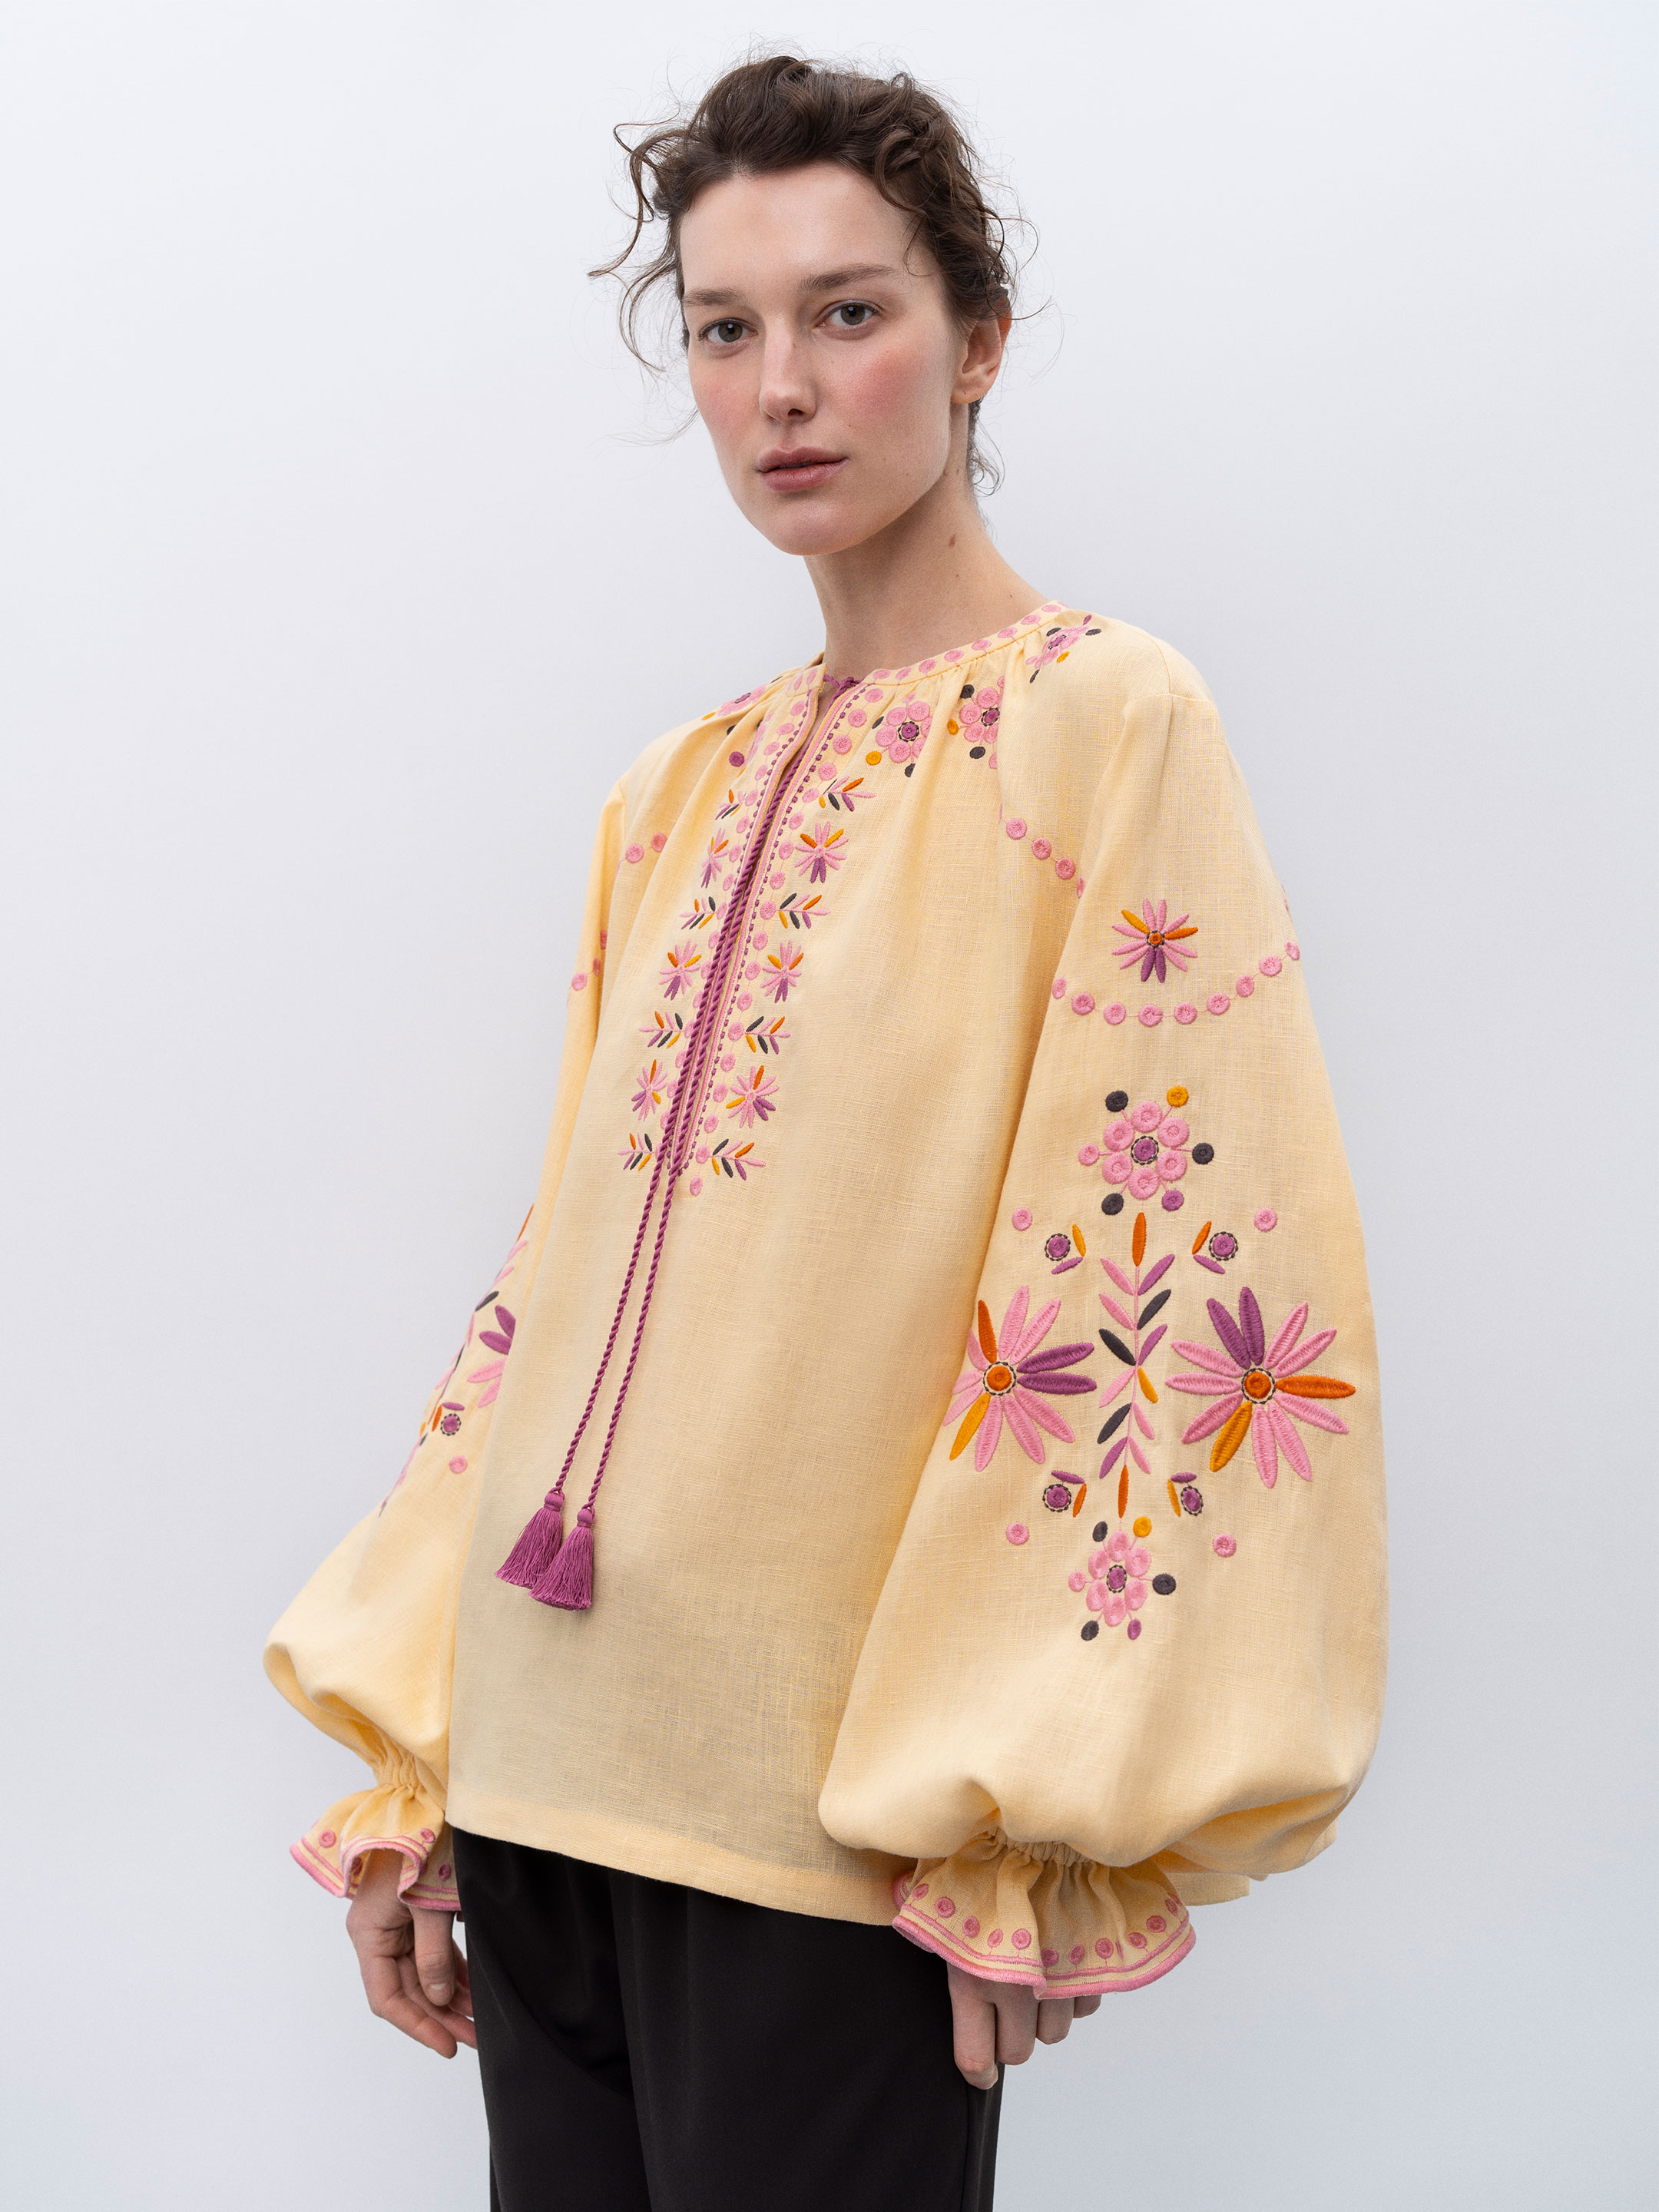 Voluminous embroidered blouse with floral ornaments Kviten - photo 1